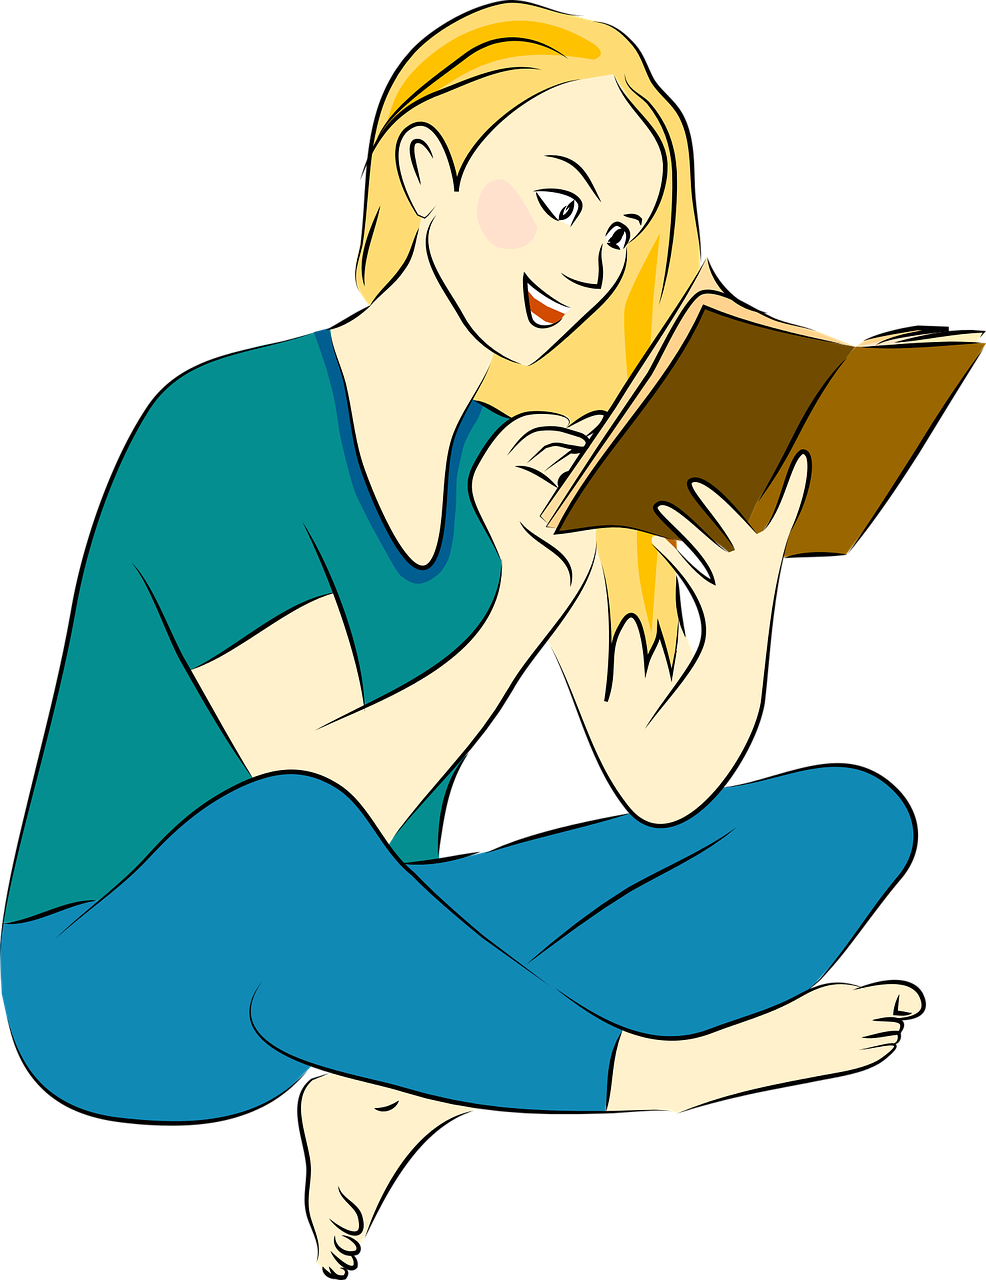 a woman sitting on the ground reading a book, a storybook illustration, pixabay, figuration libre, on a flat color black background, a blond, wikihow illustration, comics illustration